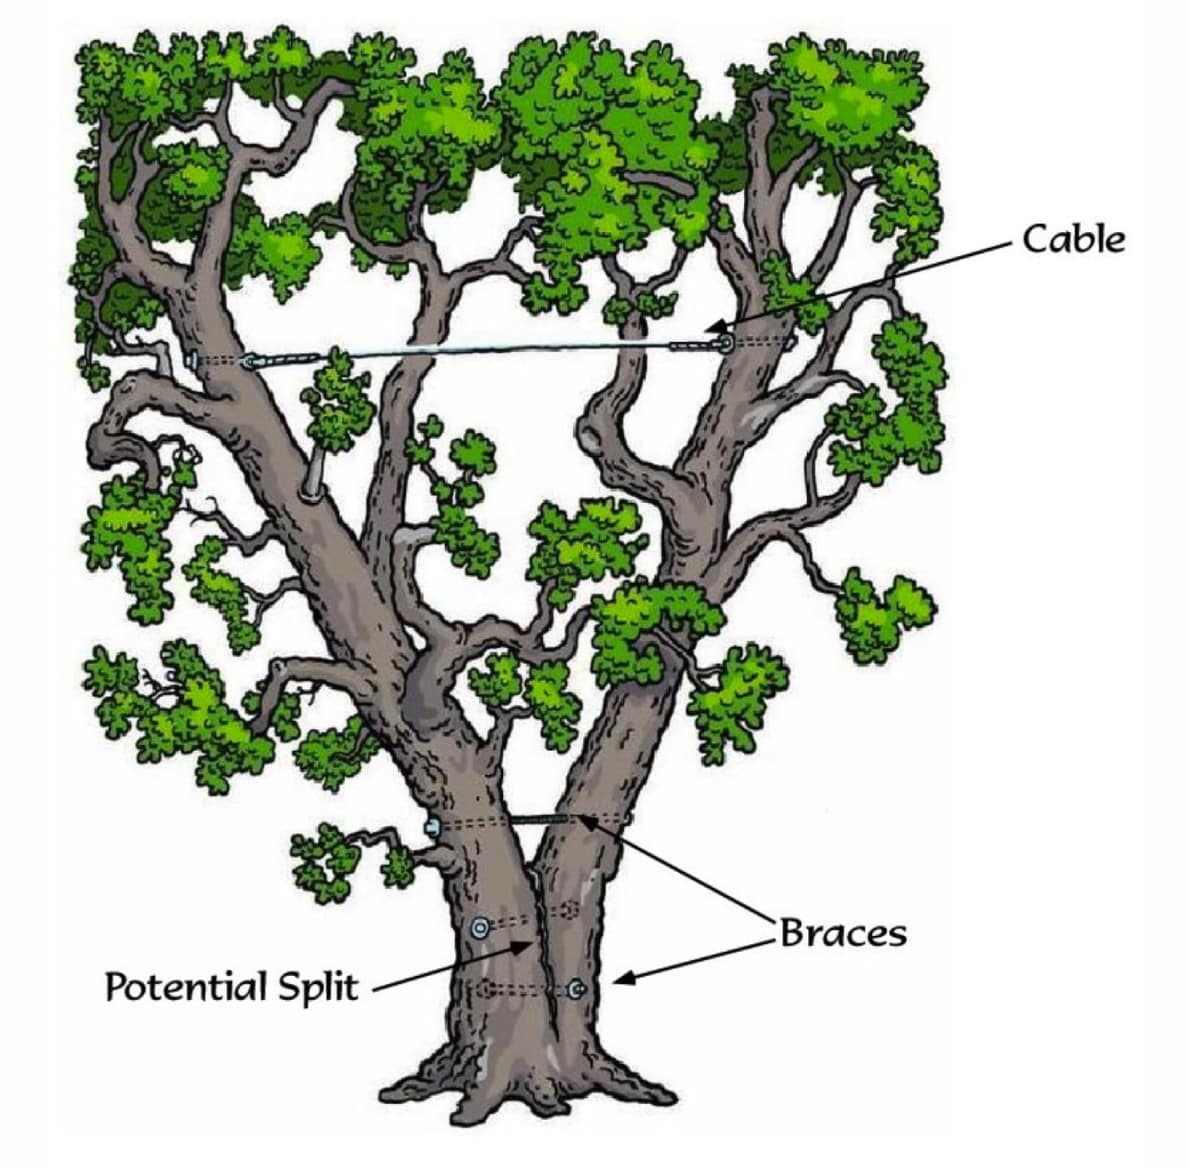 Tree Cabling, Bracing, and Other Support Systems